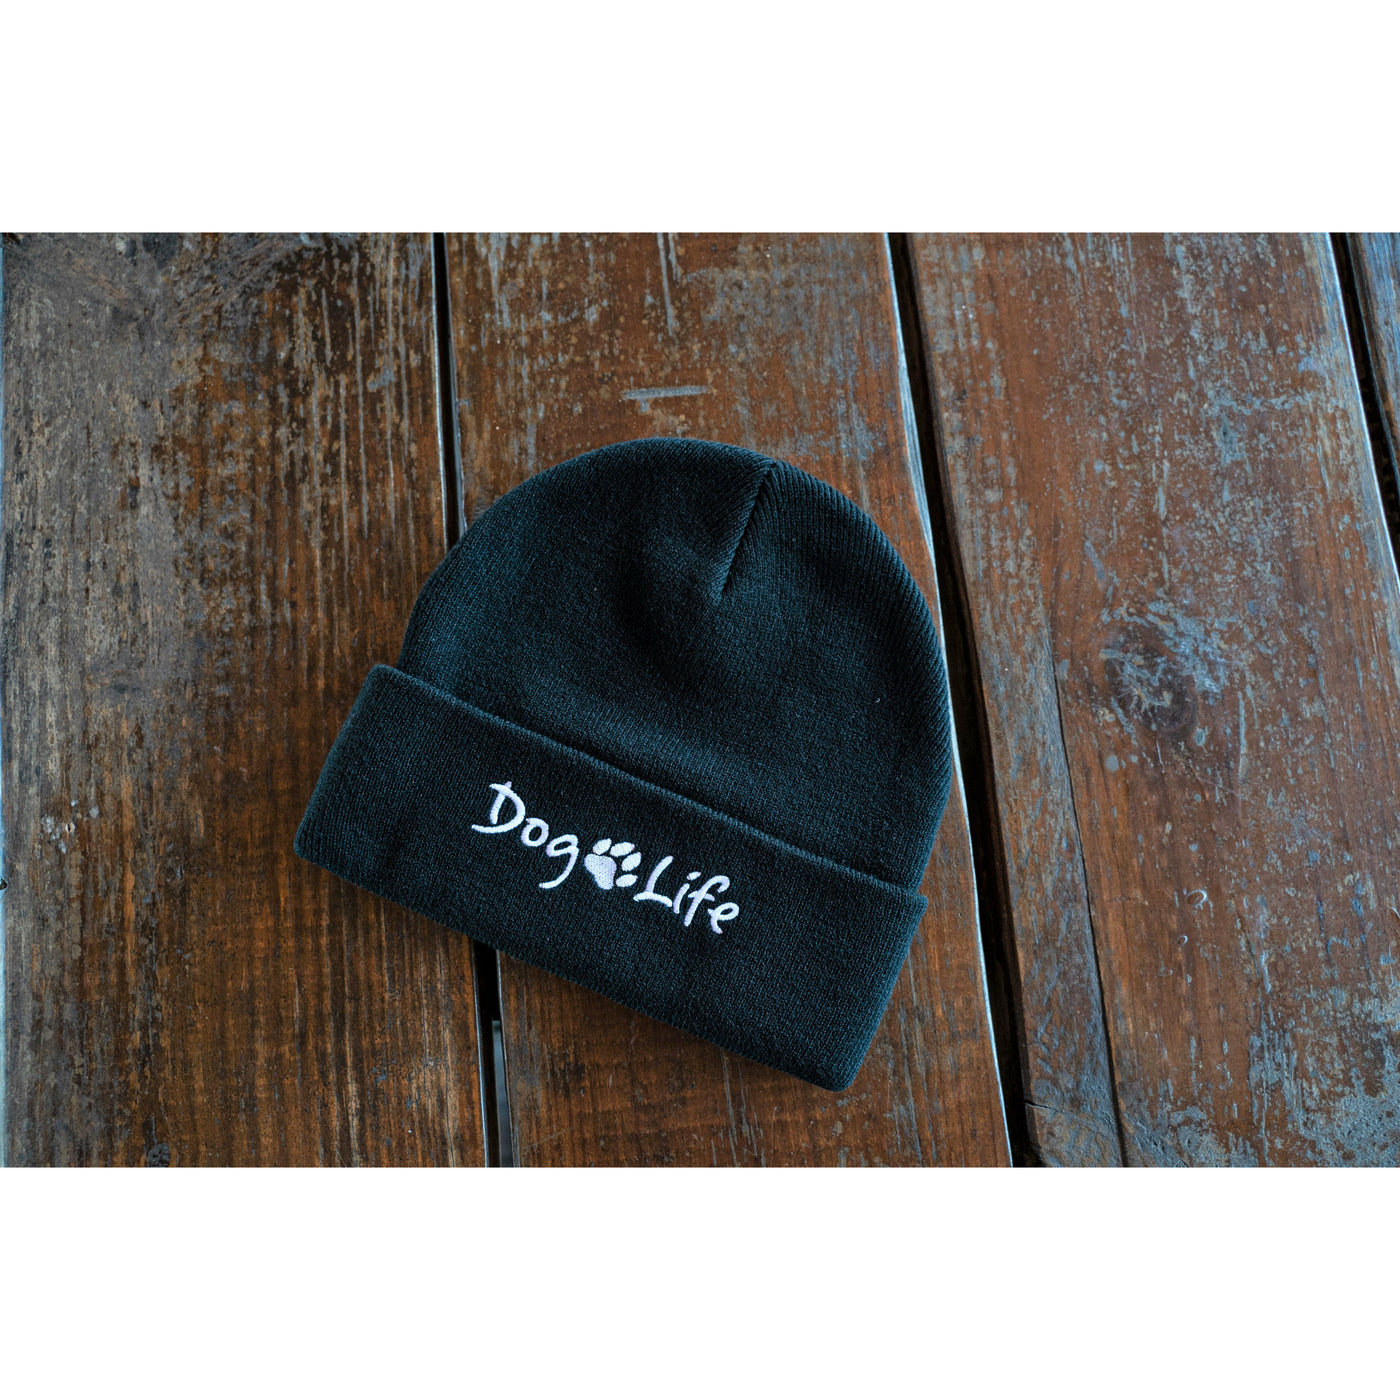 Black Dog Life beanie hat for sale. 